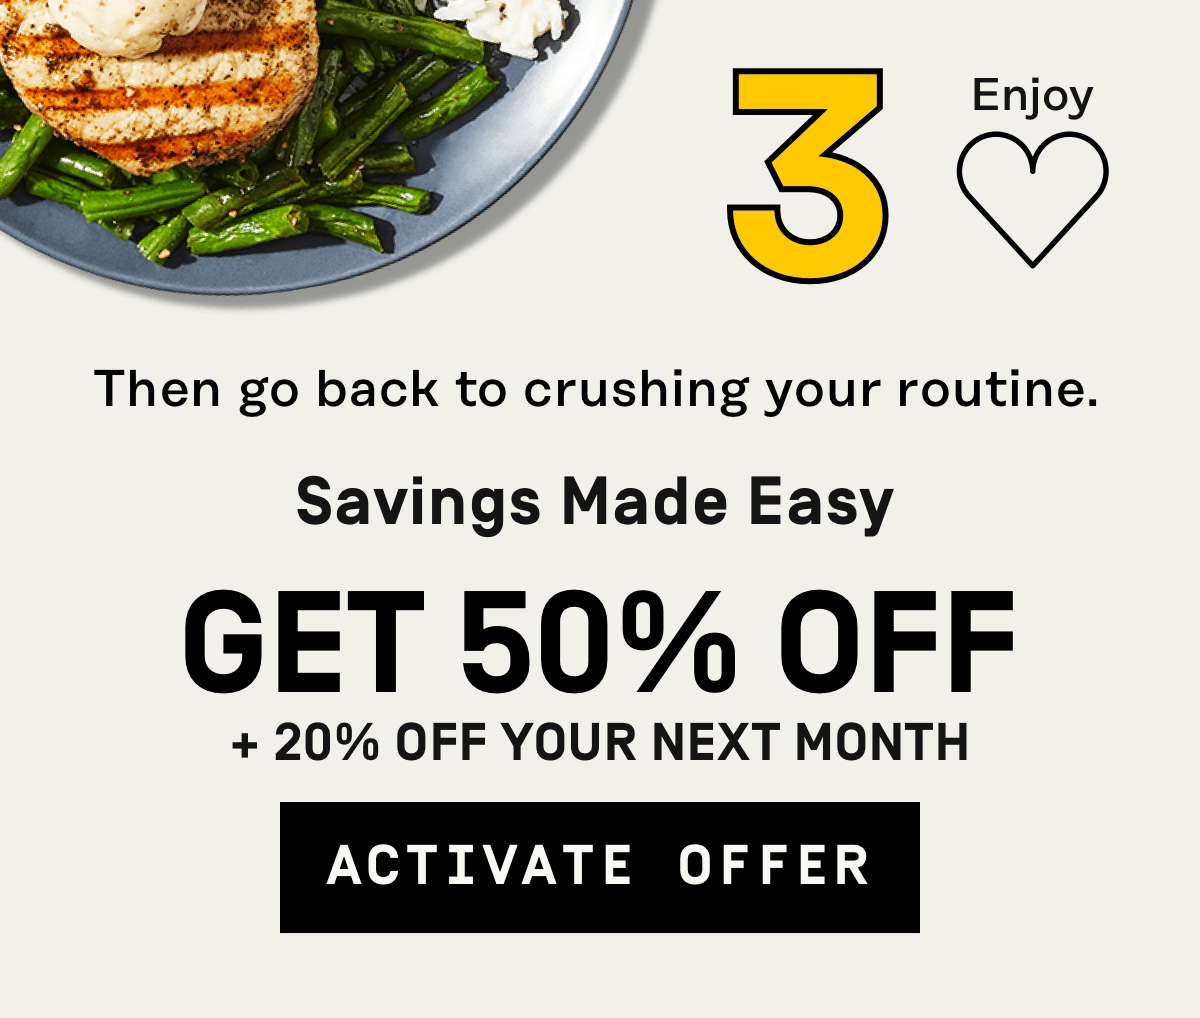 Savings made easy: 50% Off + 20% Off Your Next Month | Activate Offer